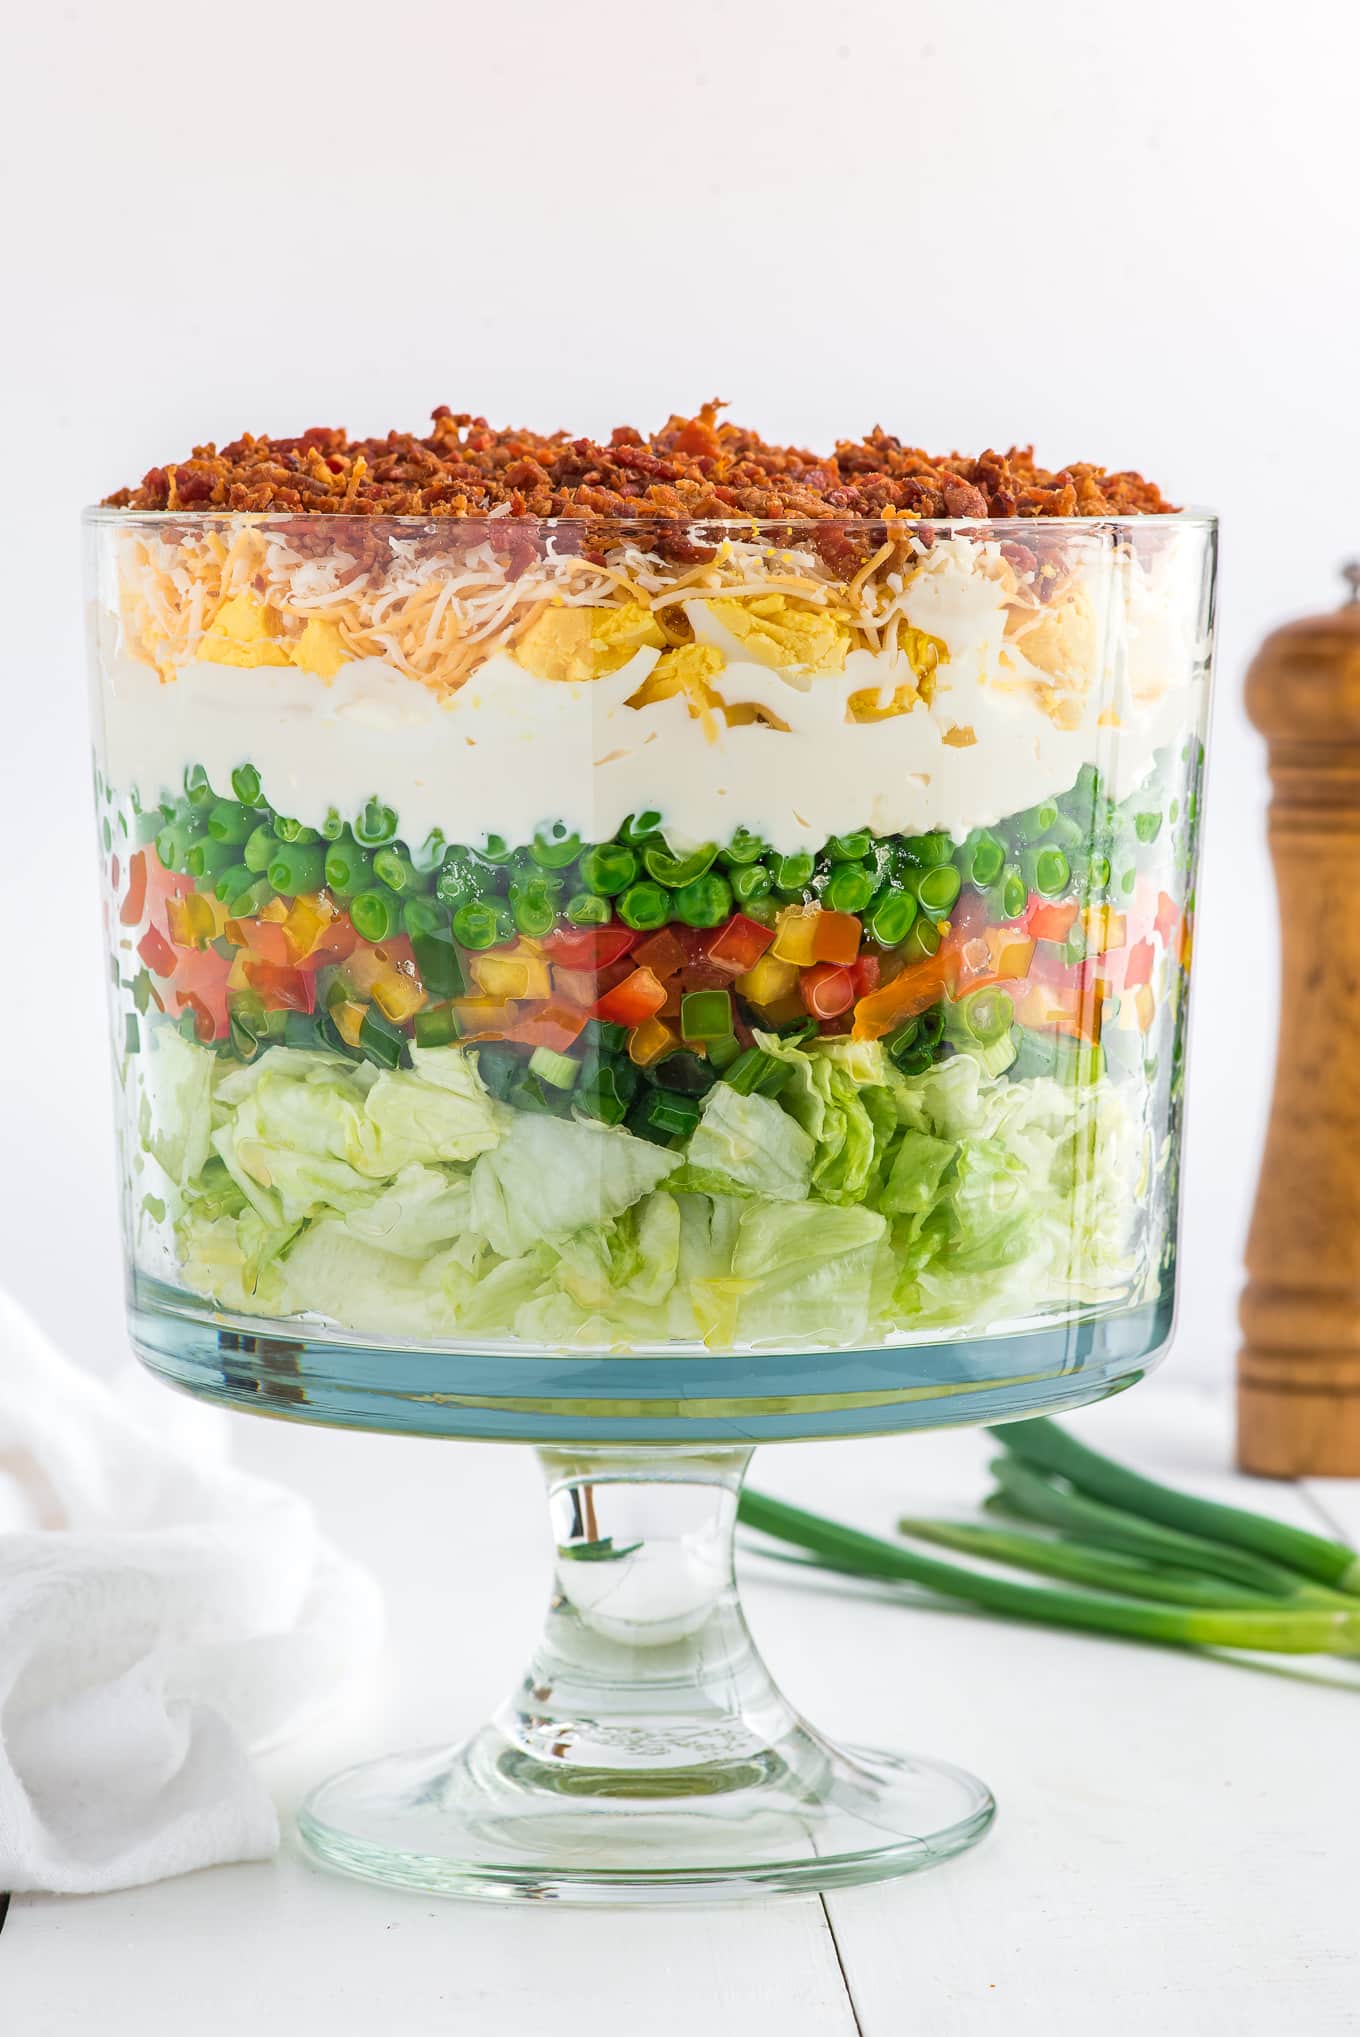 Front view of a 7 layer salad in a trifle bowl.